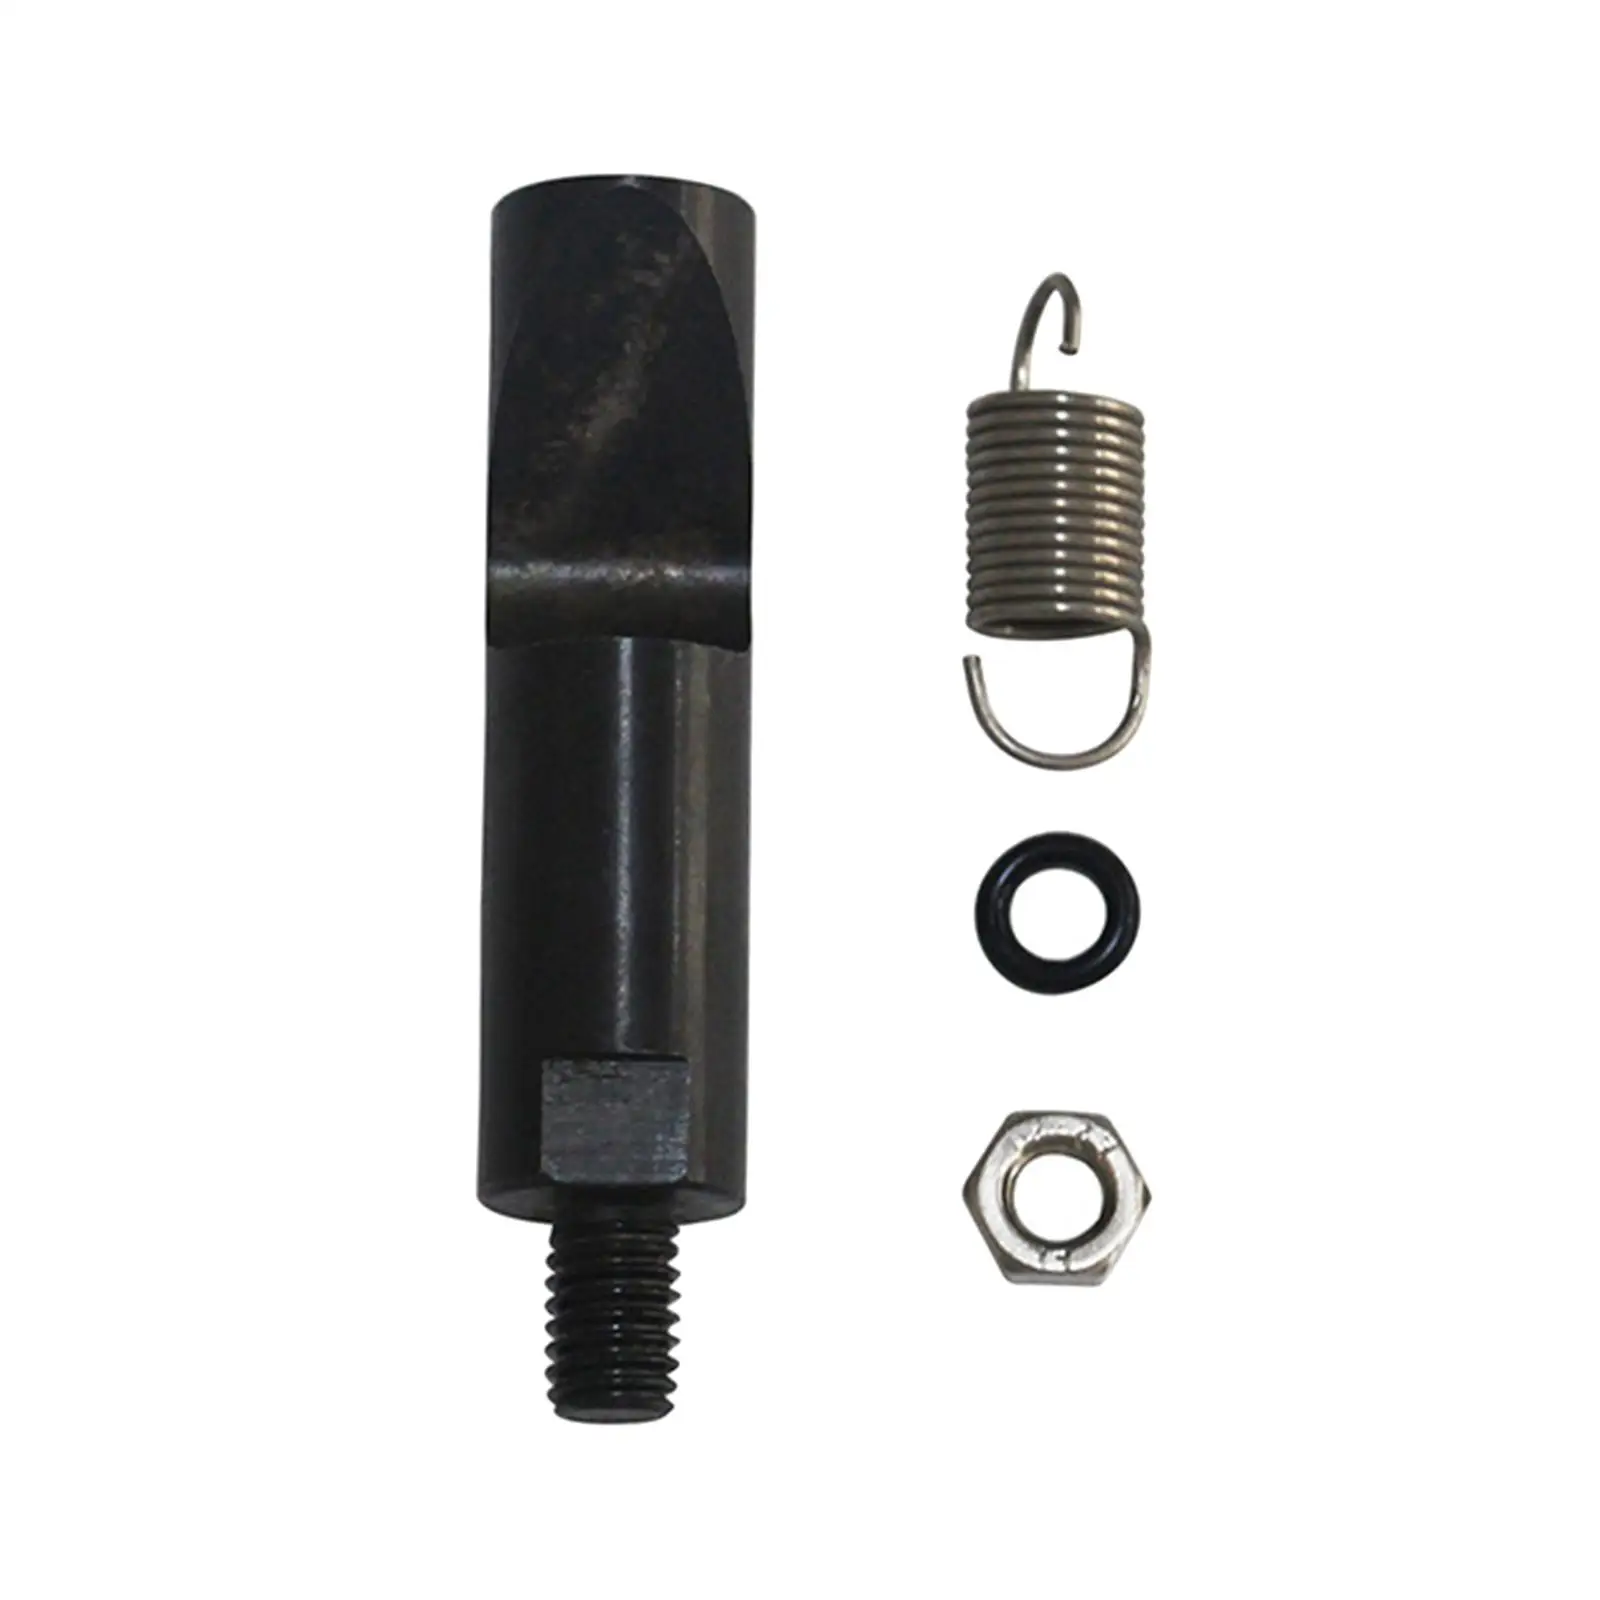 Ve Pump Fuel Pin and Governor Spring Kit Easily Install Modification for Dodge 1988 to 1993 Cummins Spare Parts Easy to Use